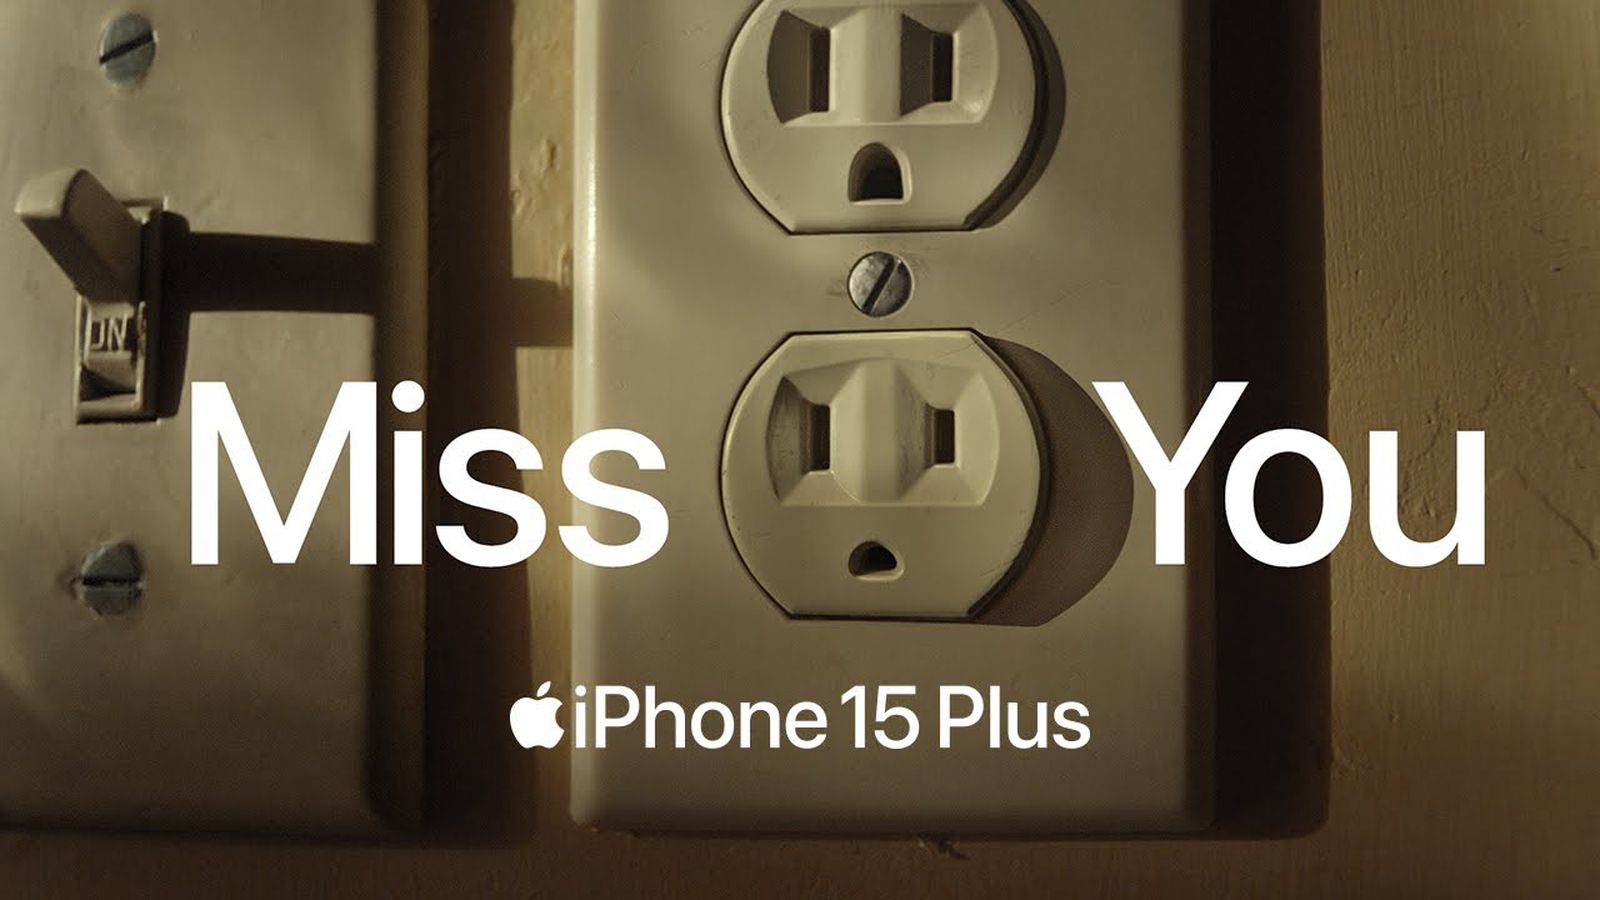 Apple Shares iPhone 15 Plus Ad Highlighting Device’s Long Battery Life